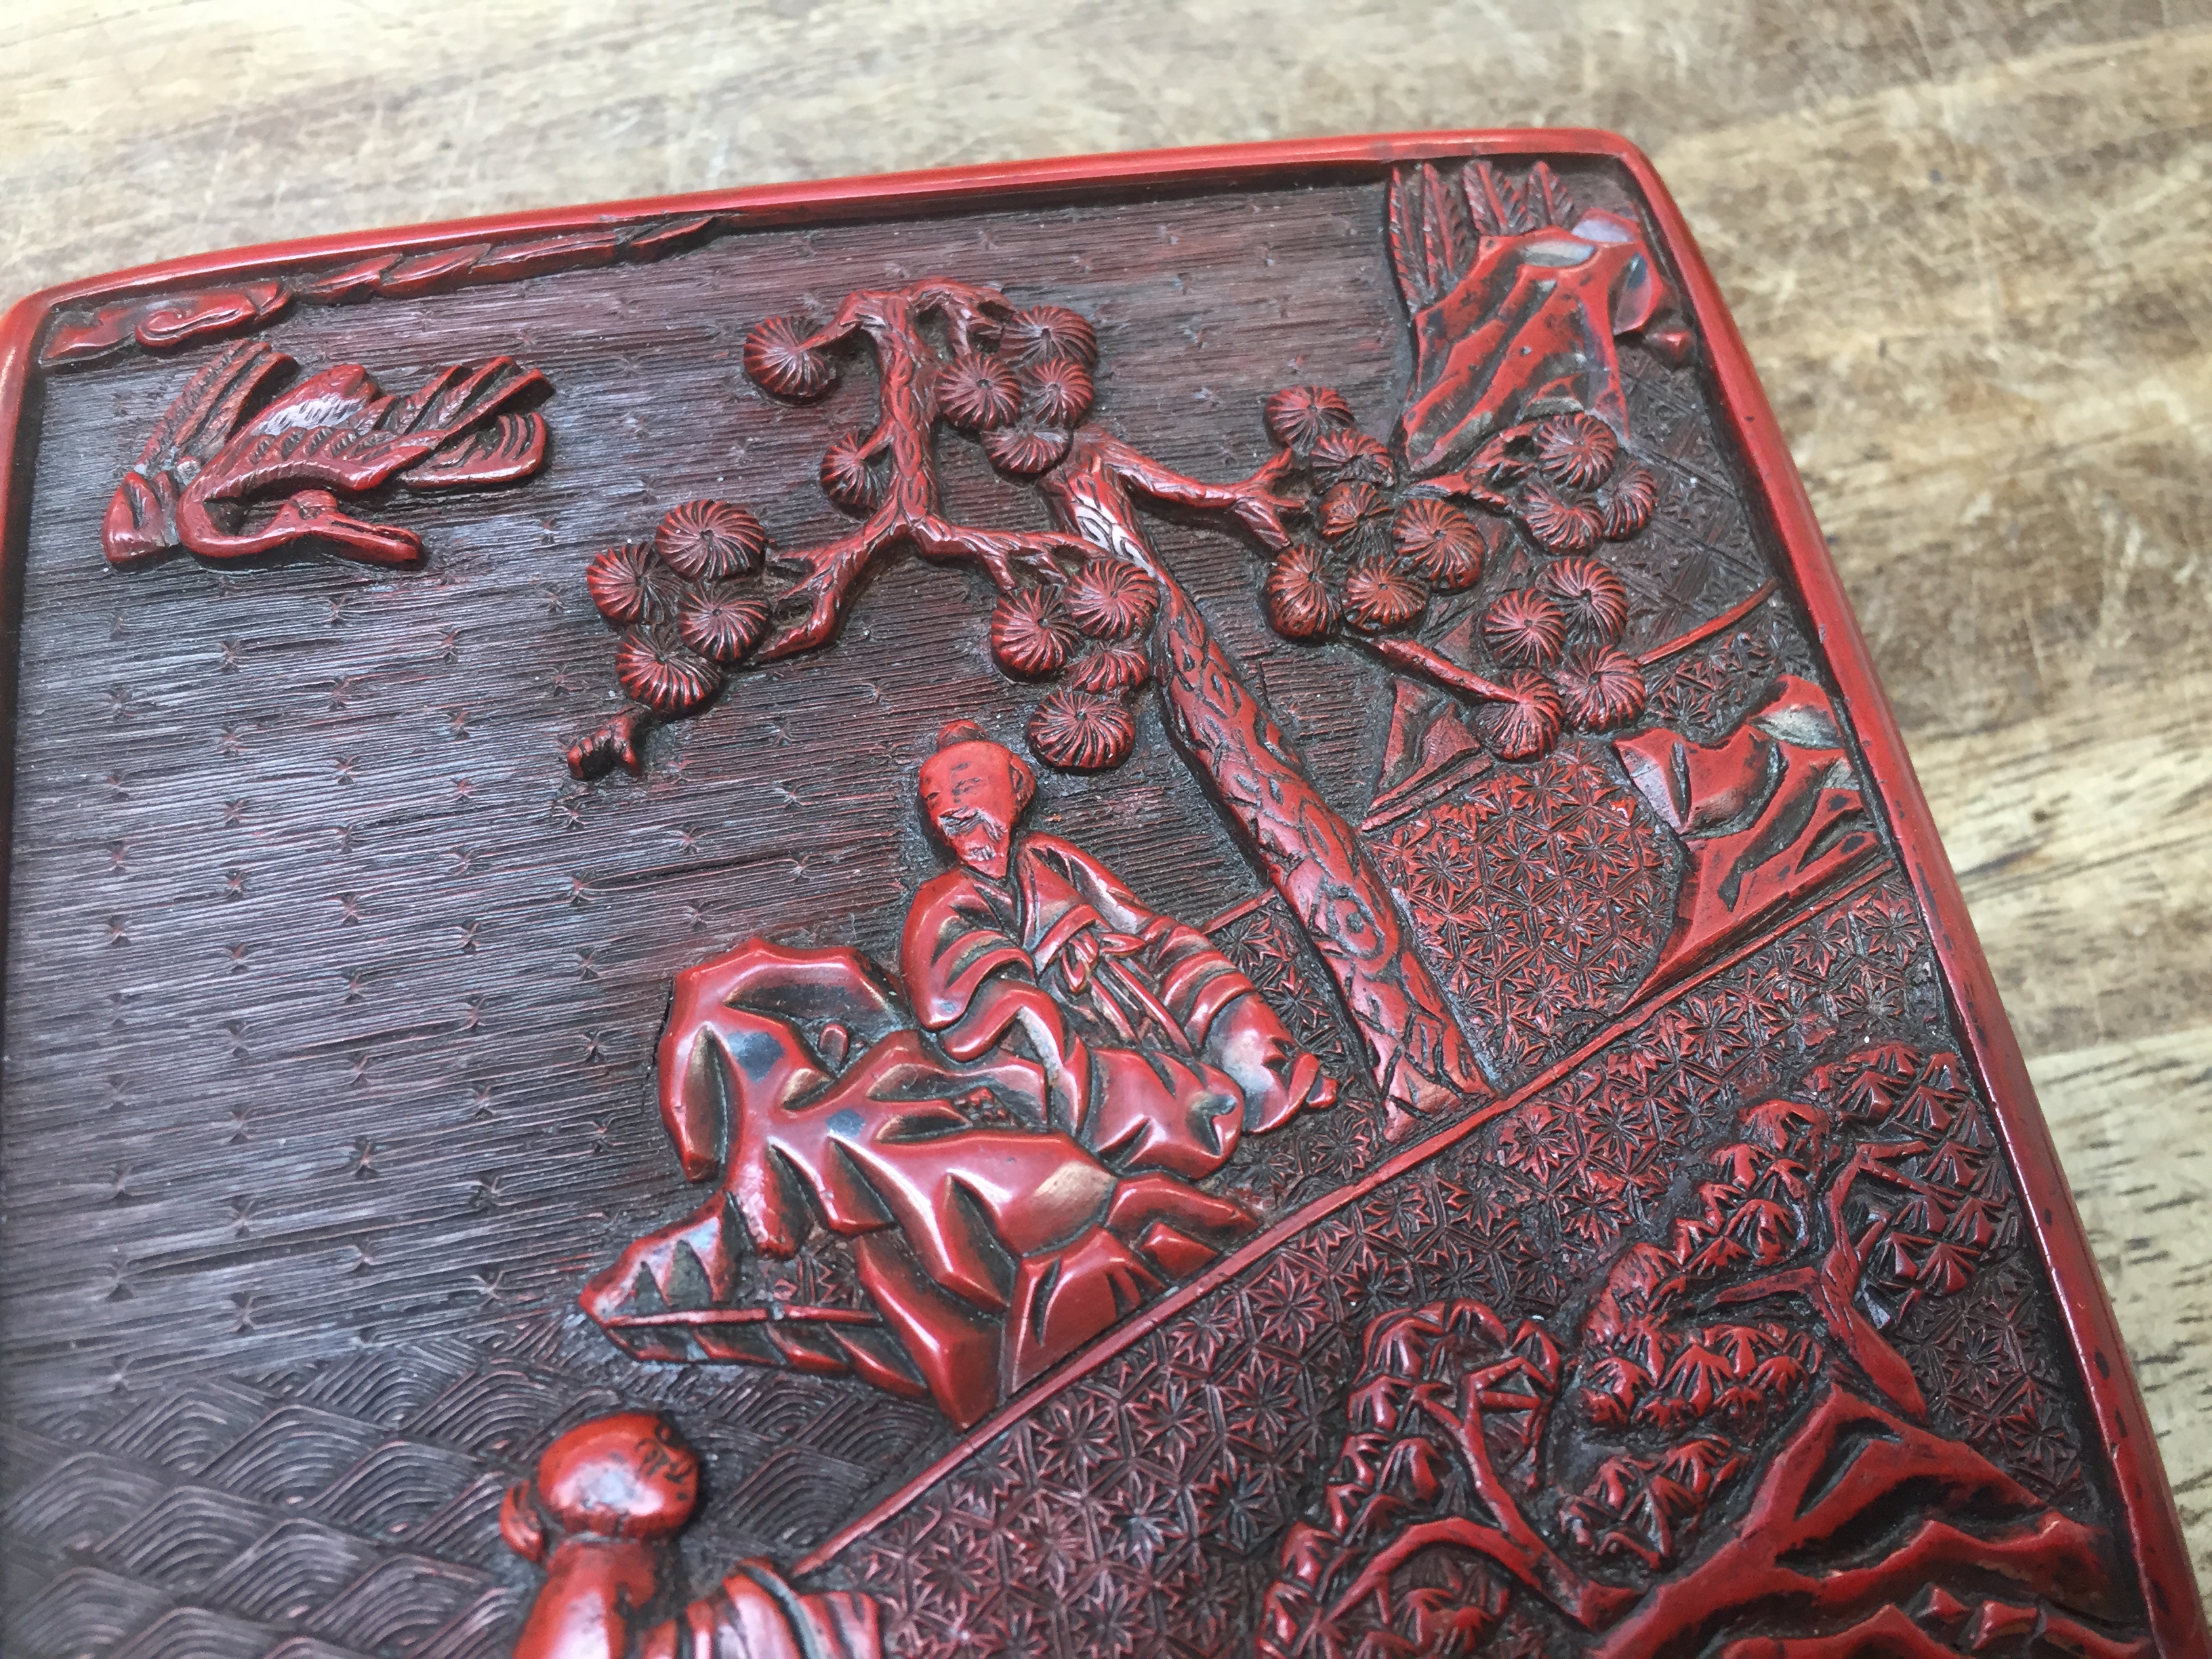 A CHINESE CINNABAR LACQUER TIERED BOX AND COVER 明 剔紅士大夫圖紋四層蓋盒 - Image 6 of 39